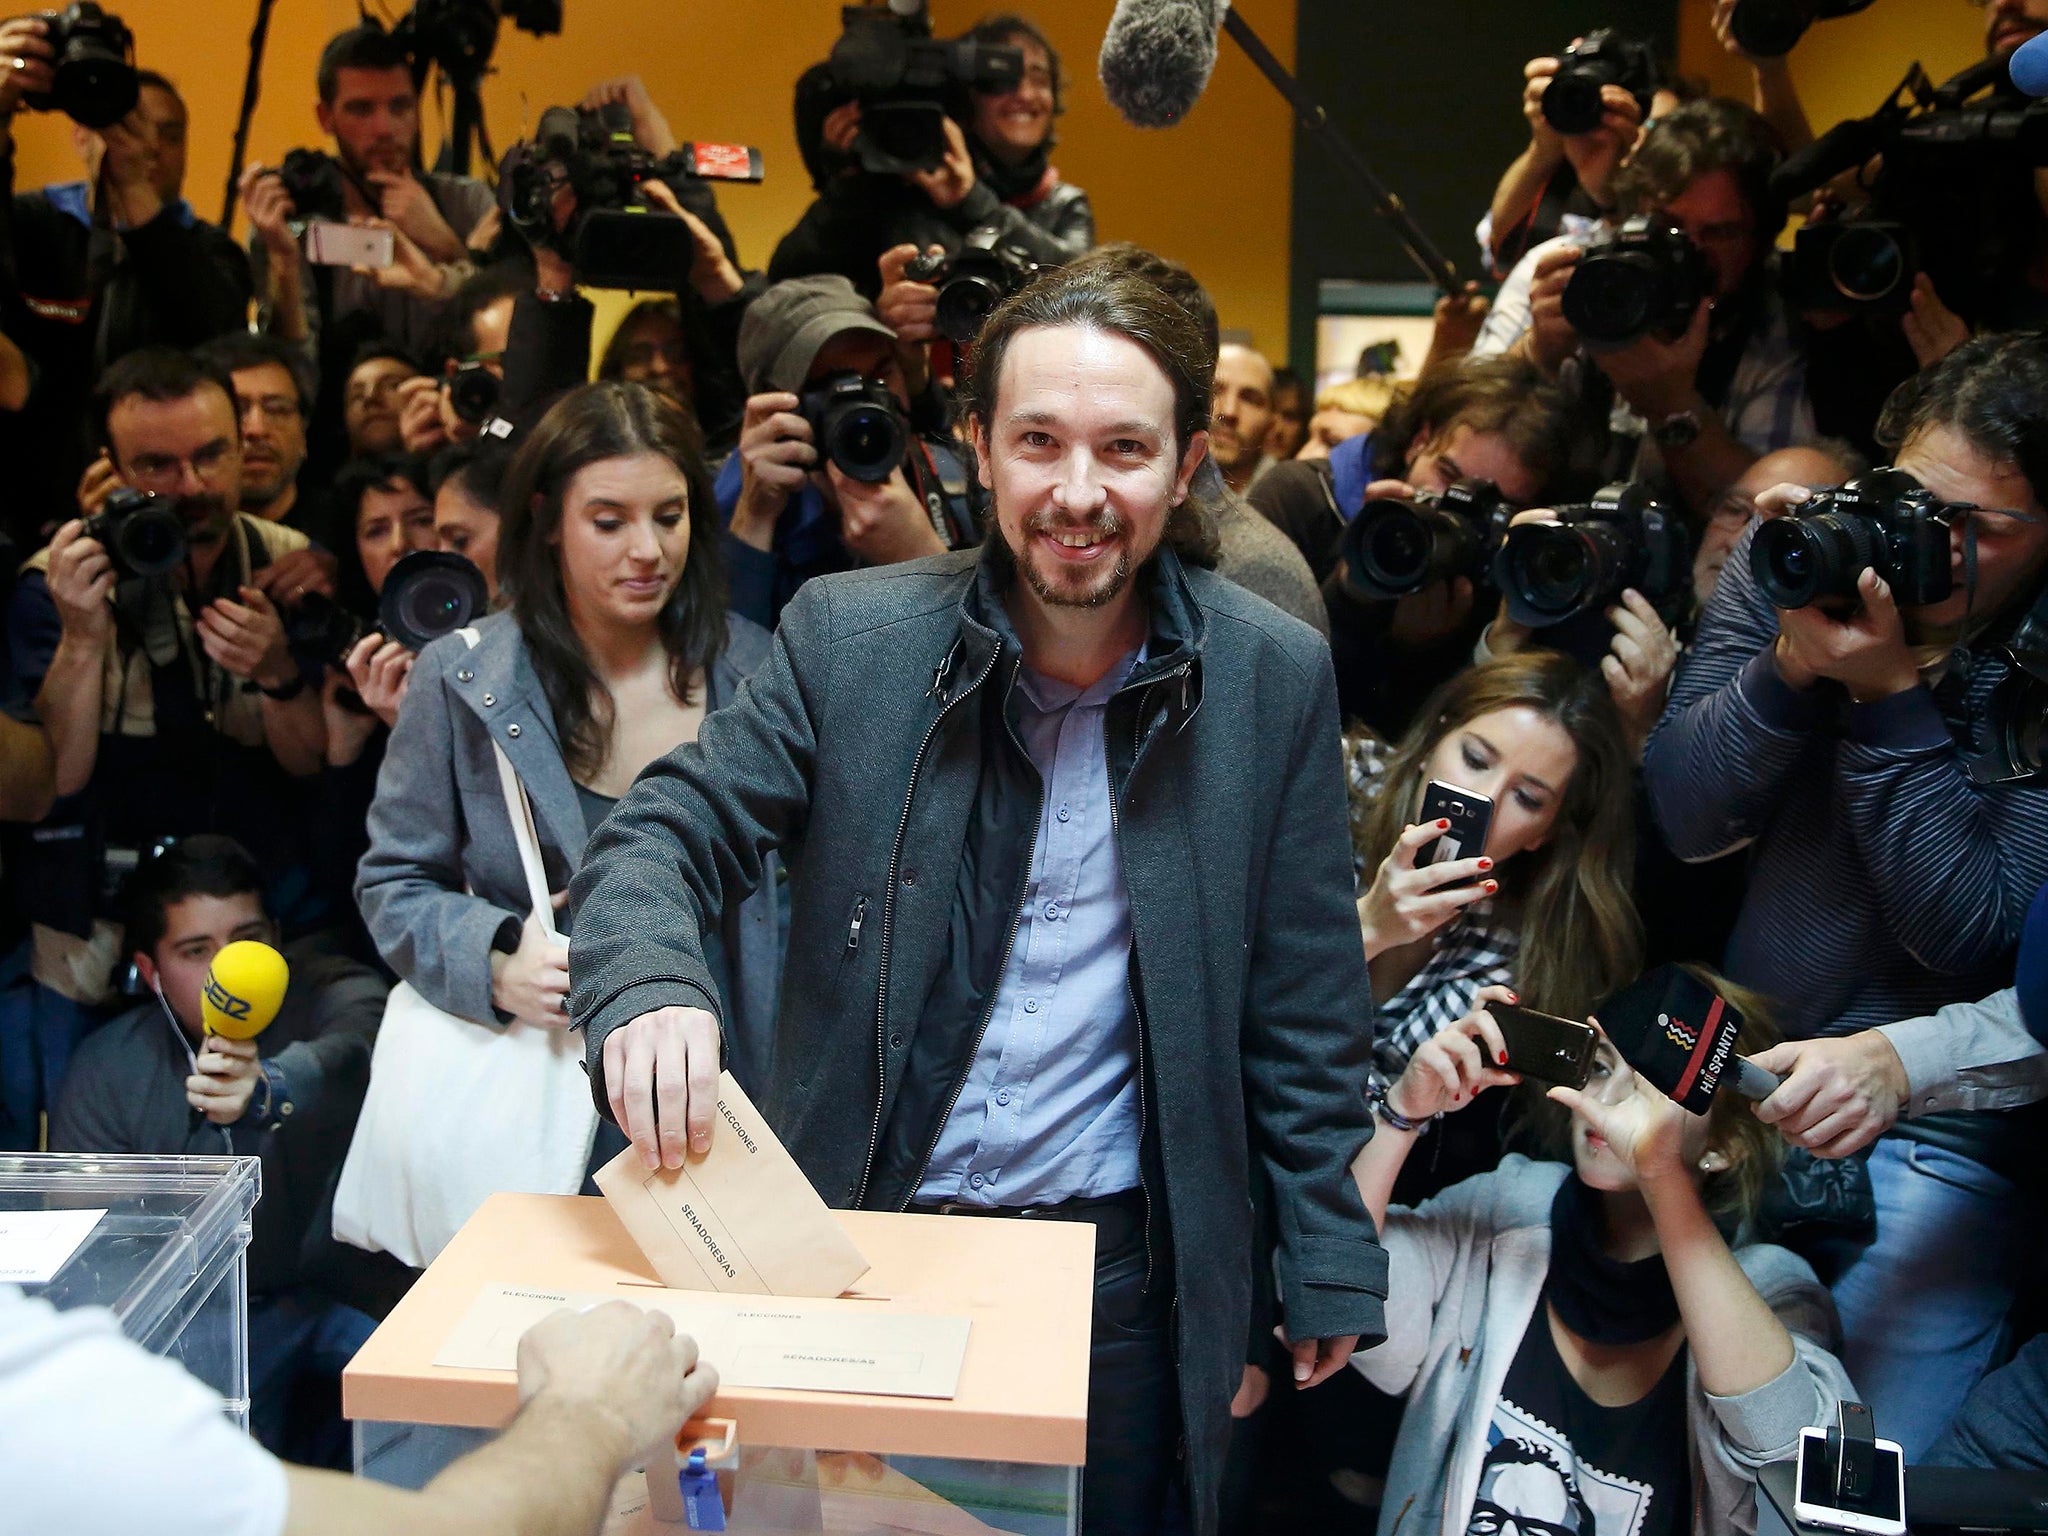 Podemos (We Can) party leader Pablo Iglesias casts his vote in Spain's general election in Madrid, Spain